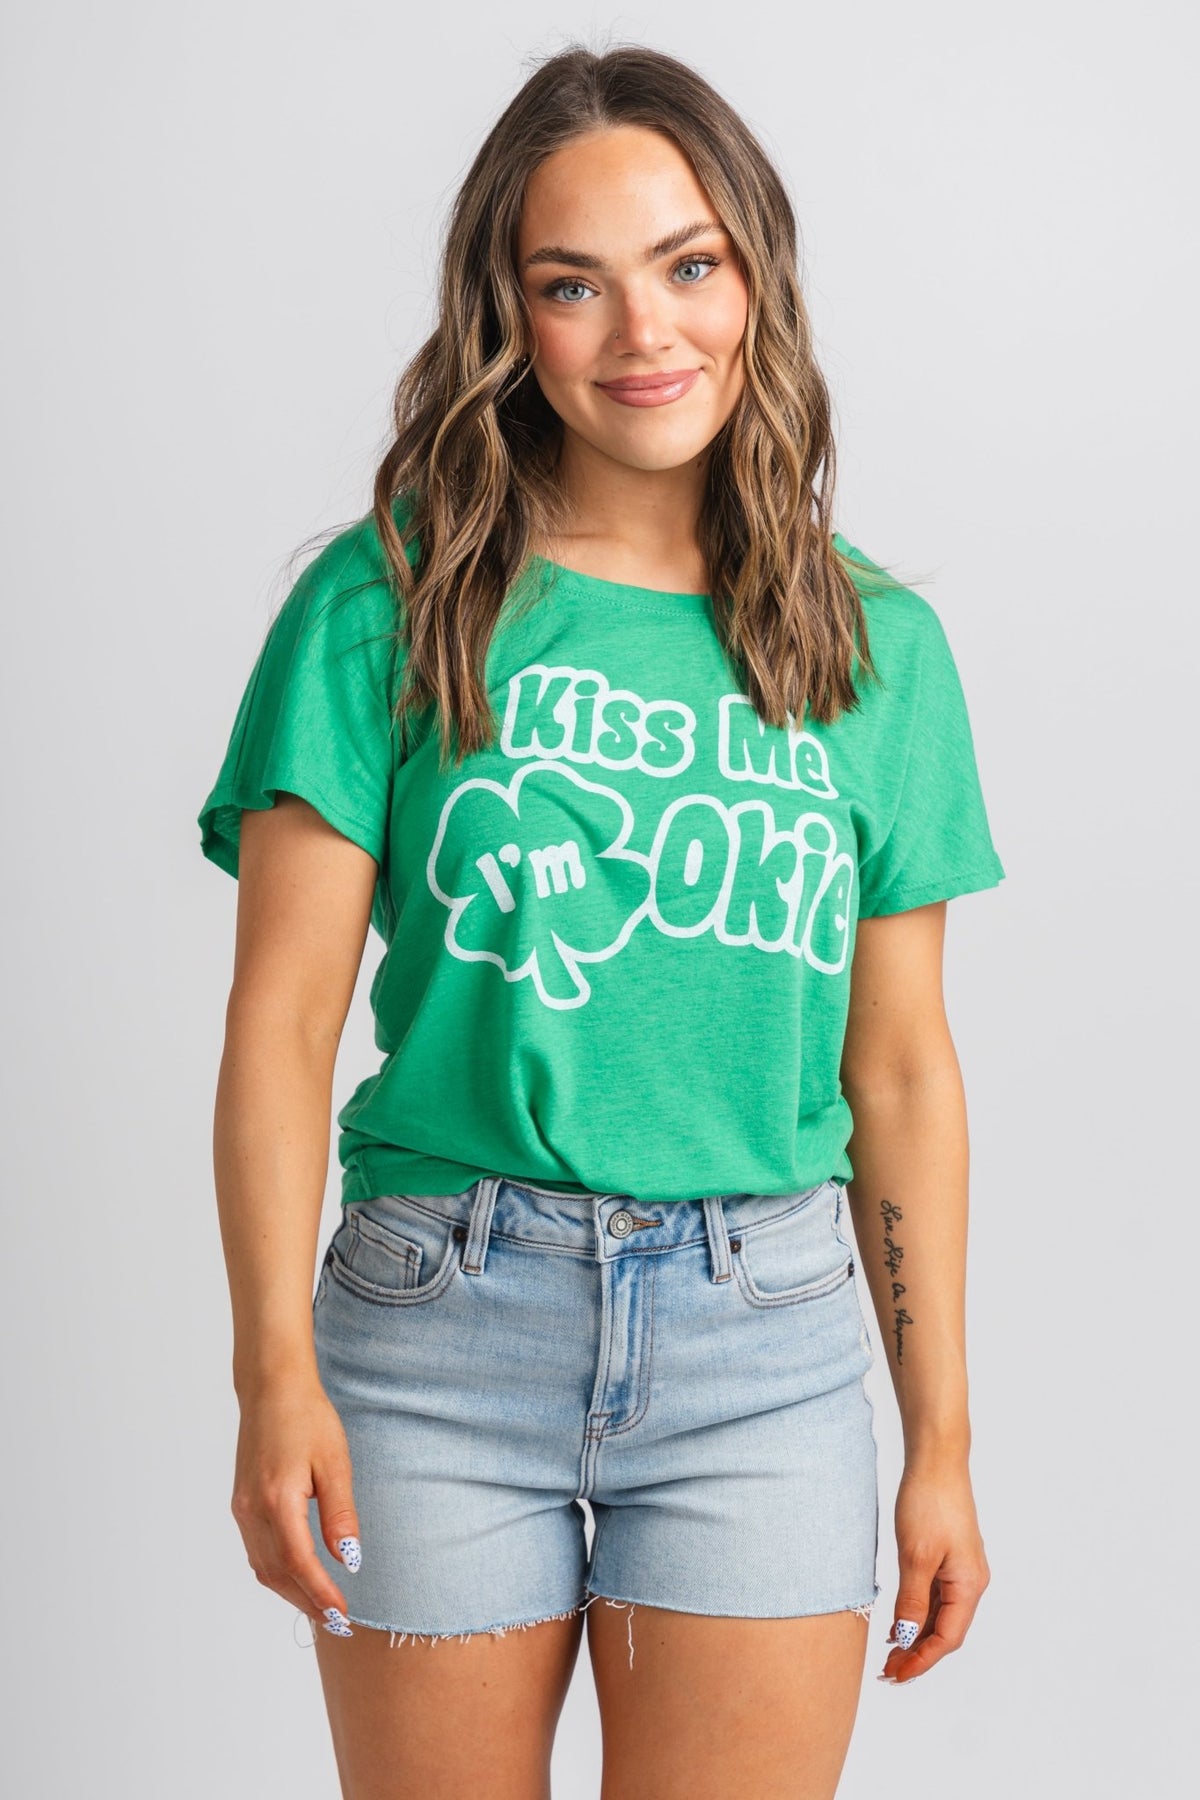 Kiss me I'm Okie t-shirt green - Trendy T-Shirts for St. Patrick's Day at Lush Fashion Lounge Boutique in Oklahoma City